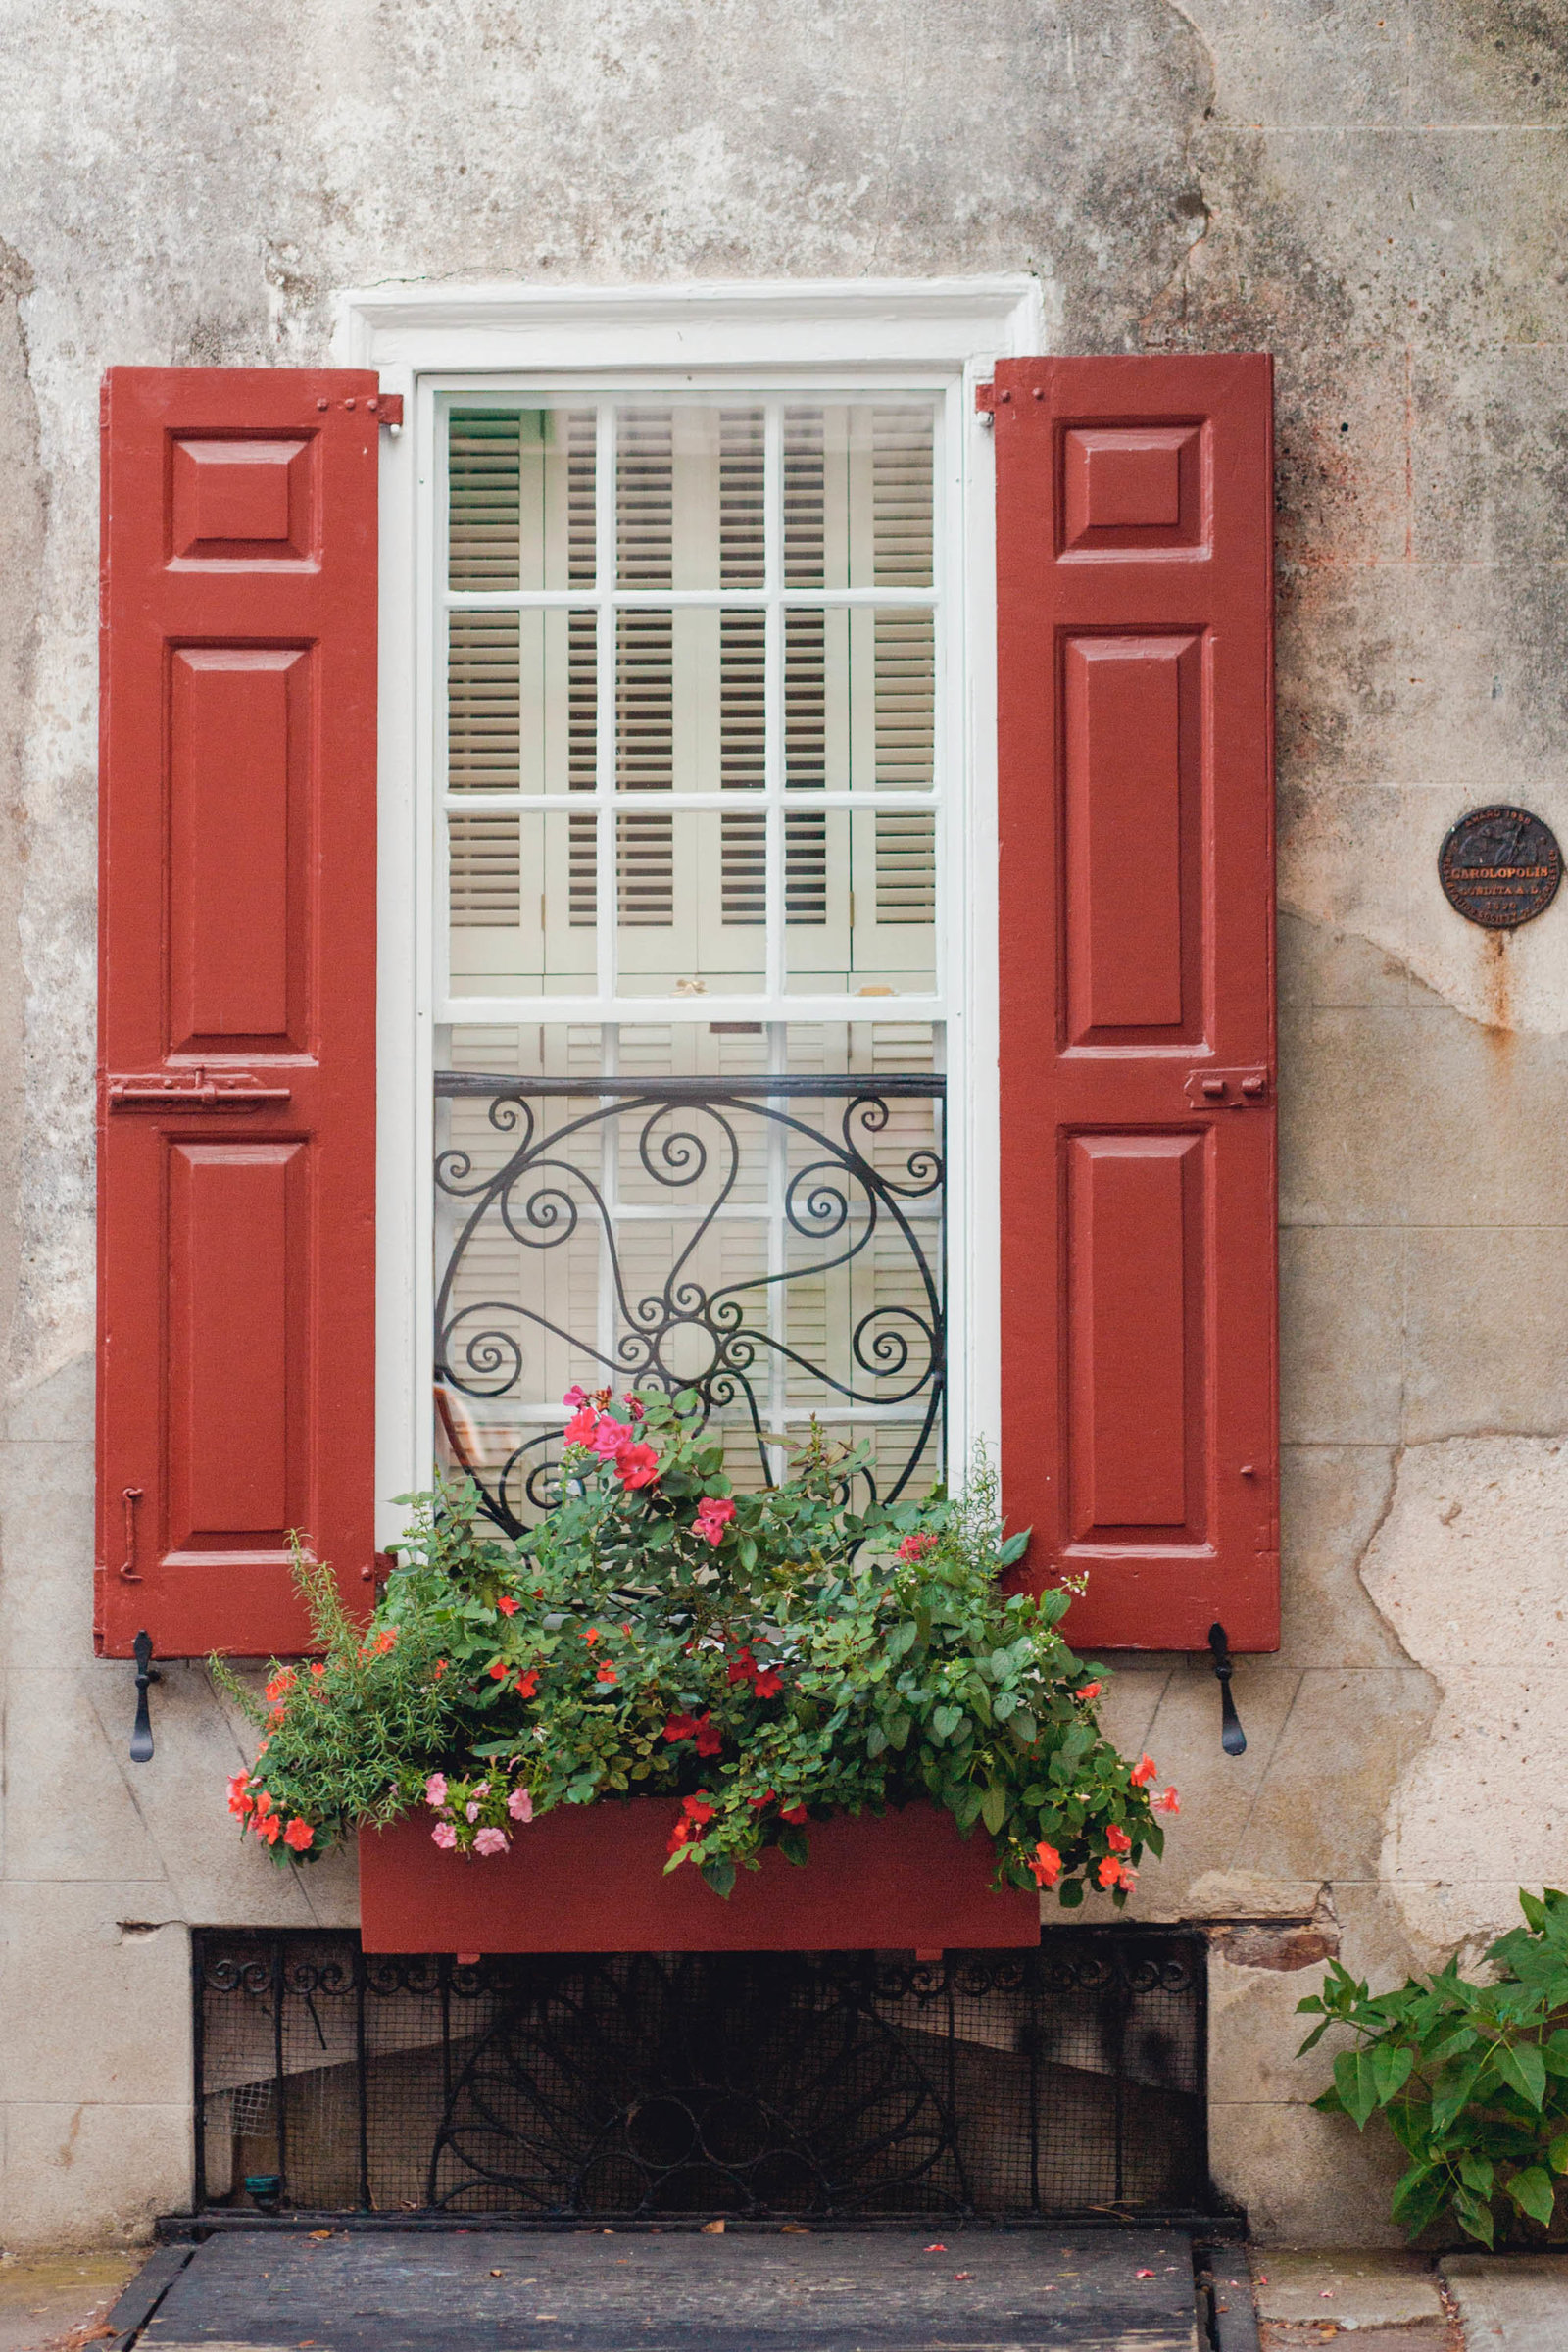 french-quarter-window-flower-charleston-sc-kate-timbers-photography-1016